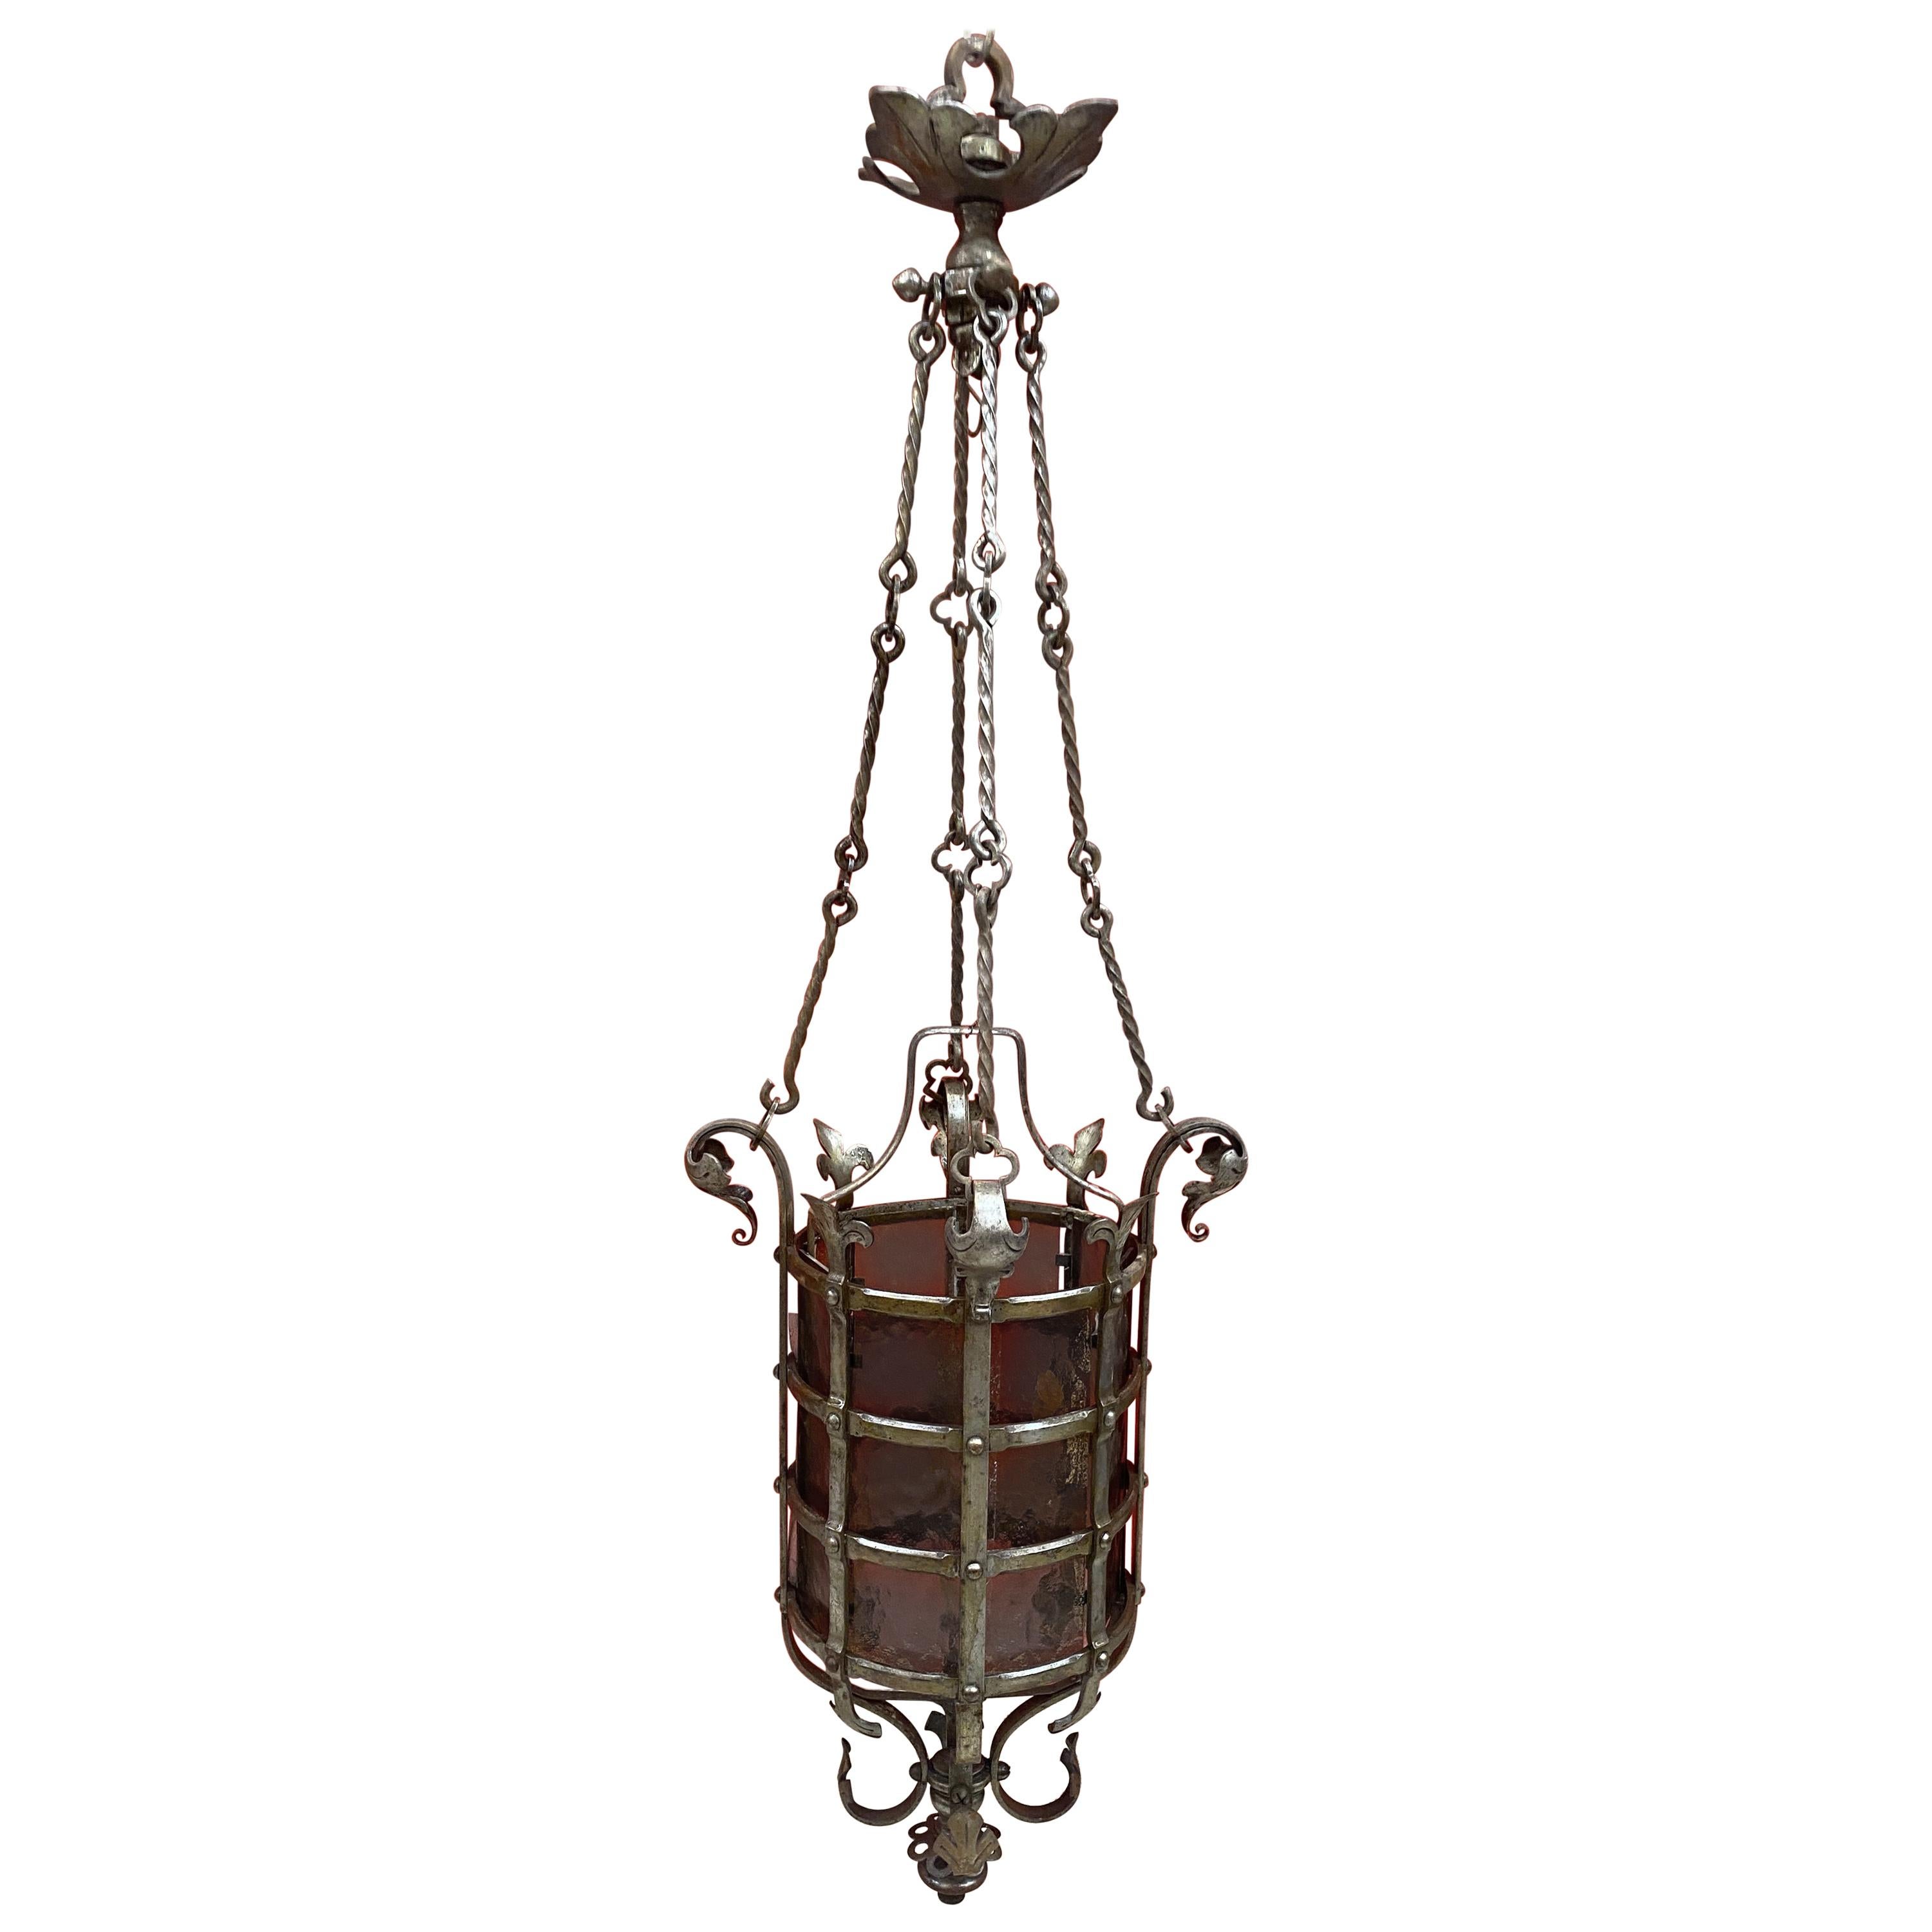 Exceptional Wrought Iron Castle Lantern circa 1930 Very Nice Work of Ironwork For Sale